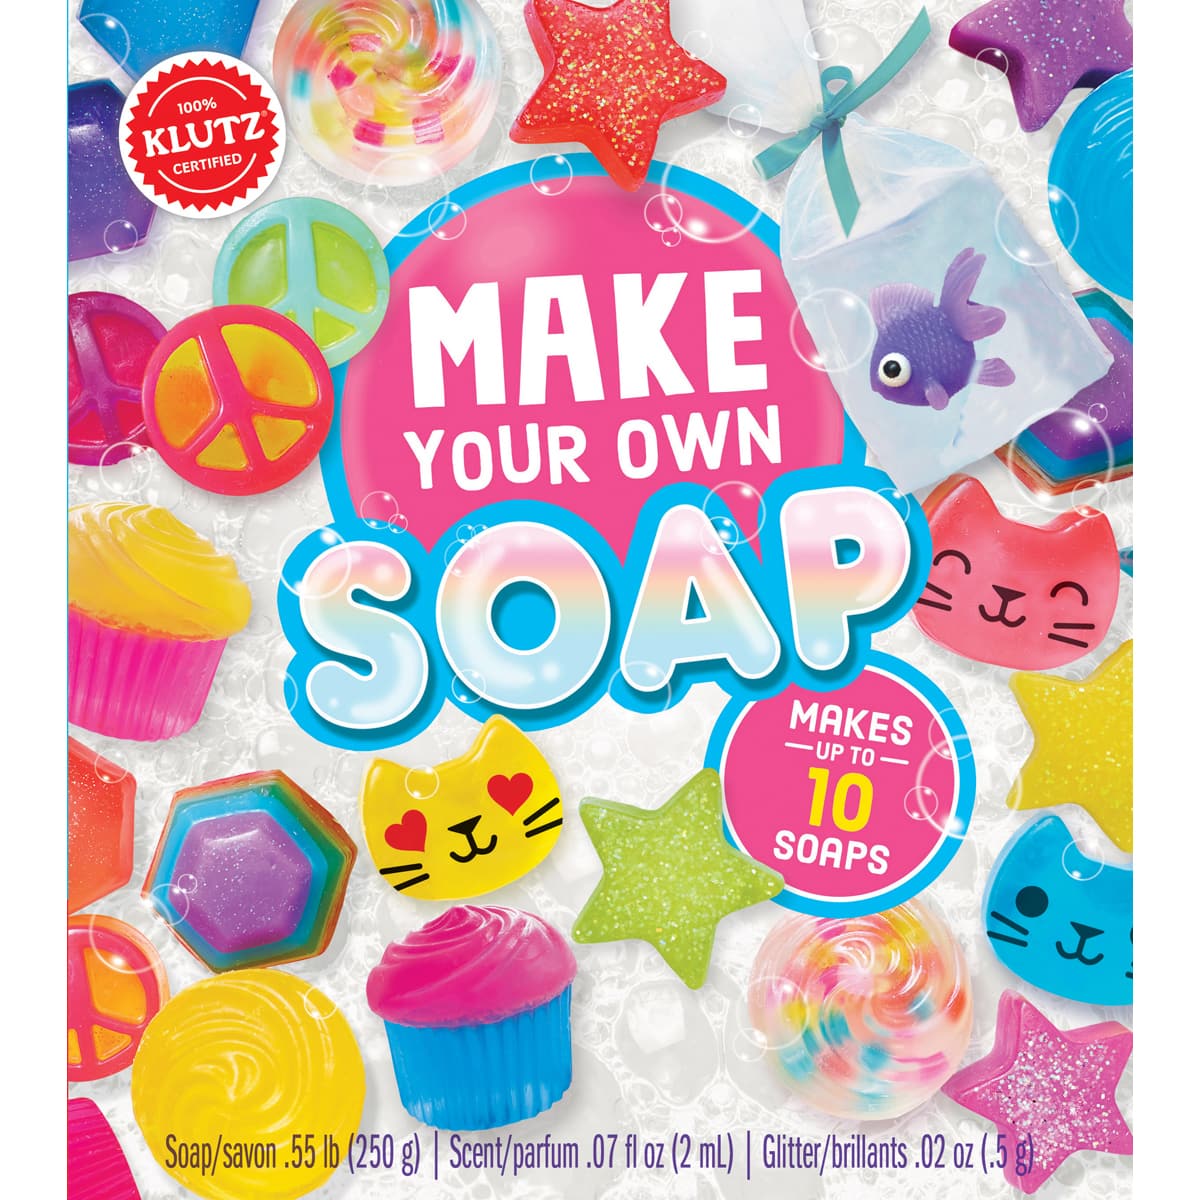 Klutz Make Your Own Soap Craft & Science Kit NEW Kids Fun Arts and Crafts